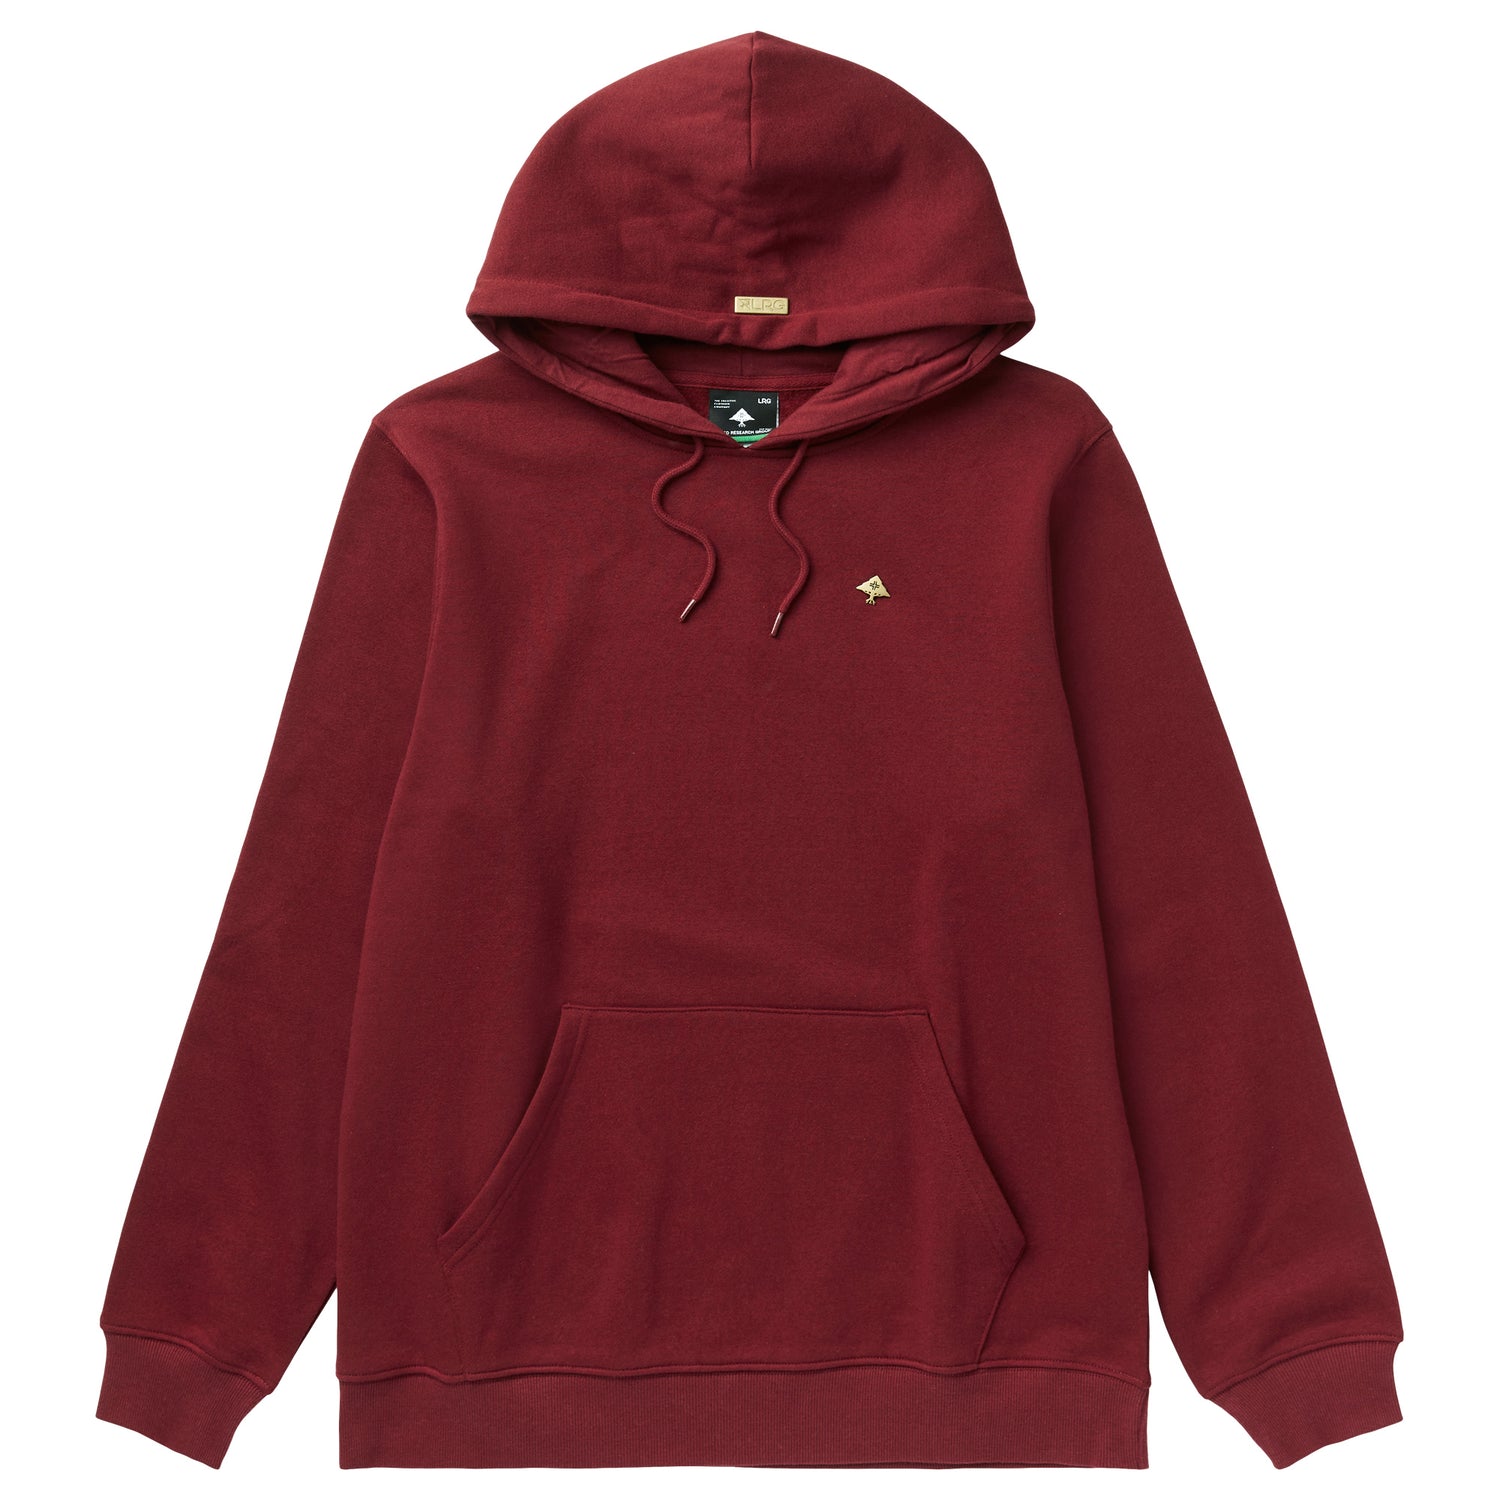 NOTHING BUT GOLD PULLOVER HOODIE - BURGUNDY